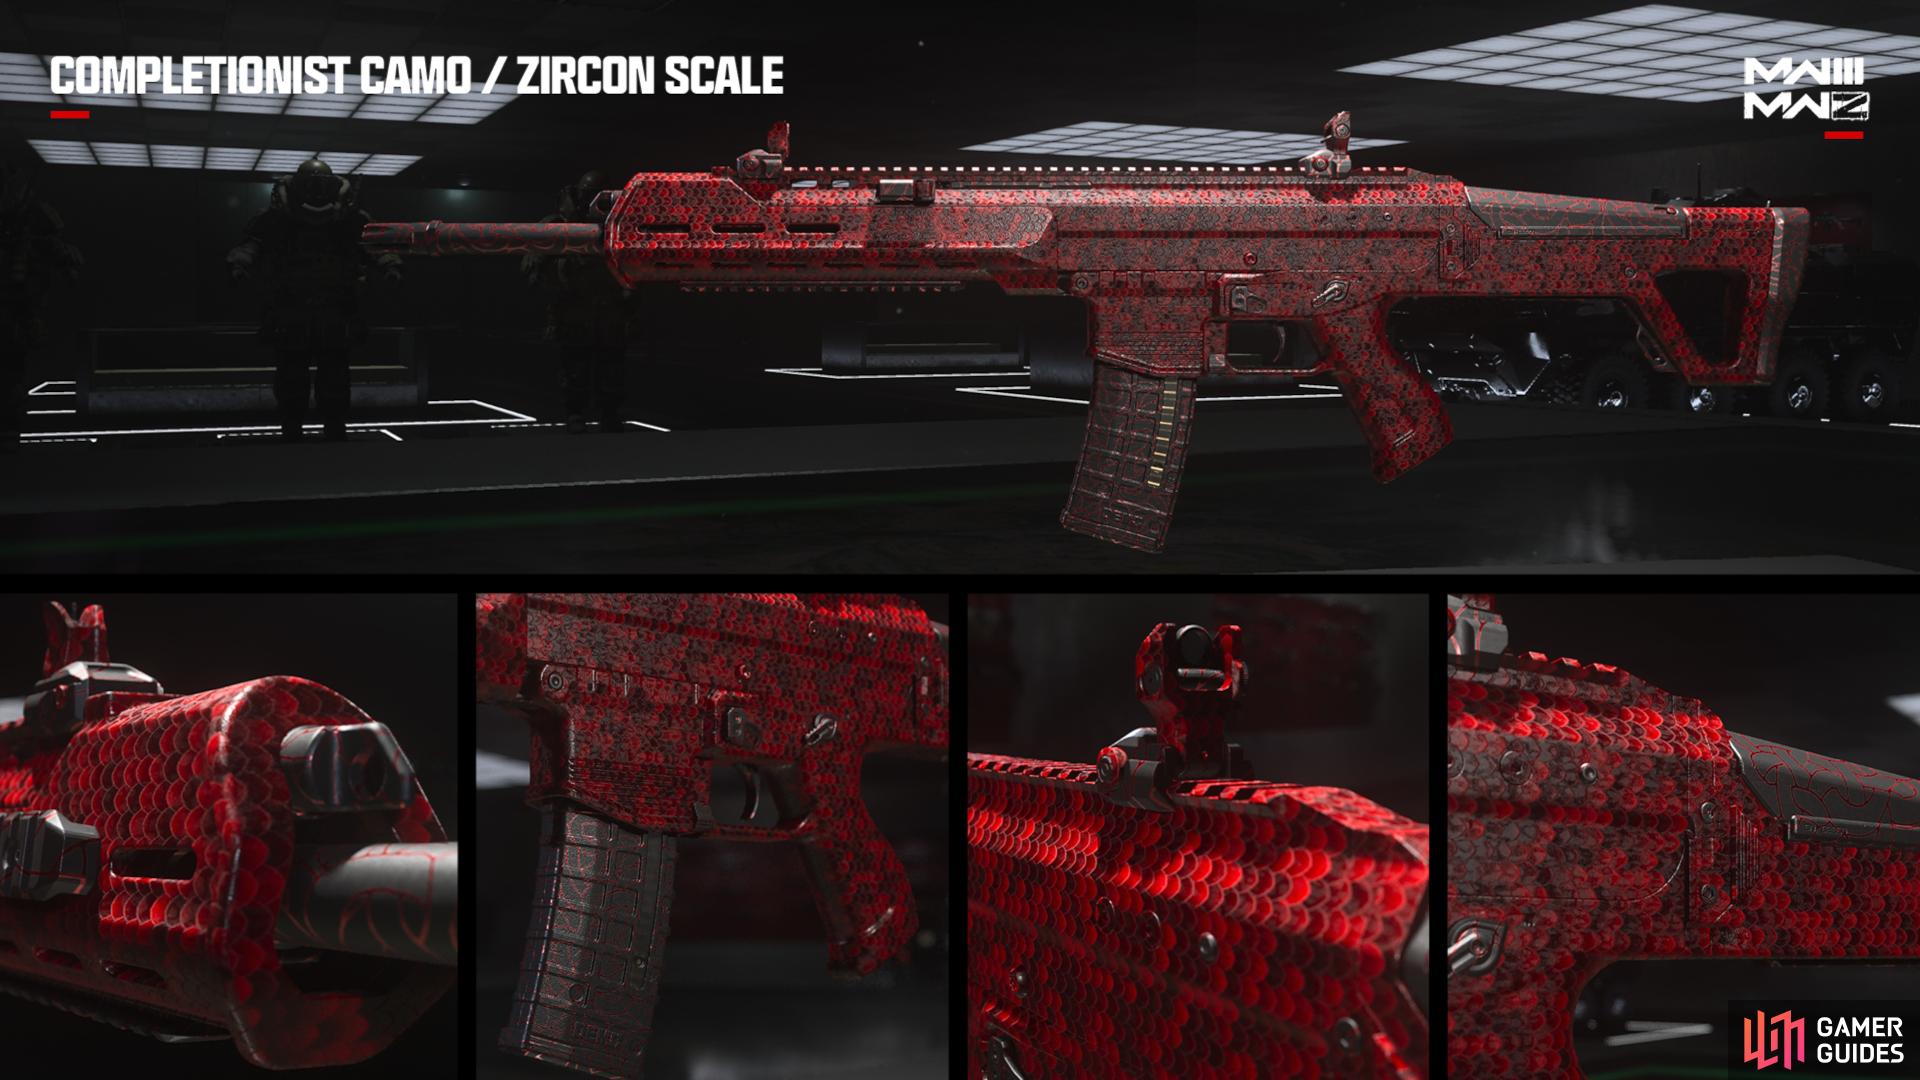 Zircon Scale is the second tier of MW3 Camo Challenges in the Zombies game mode.